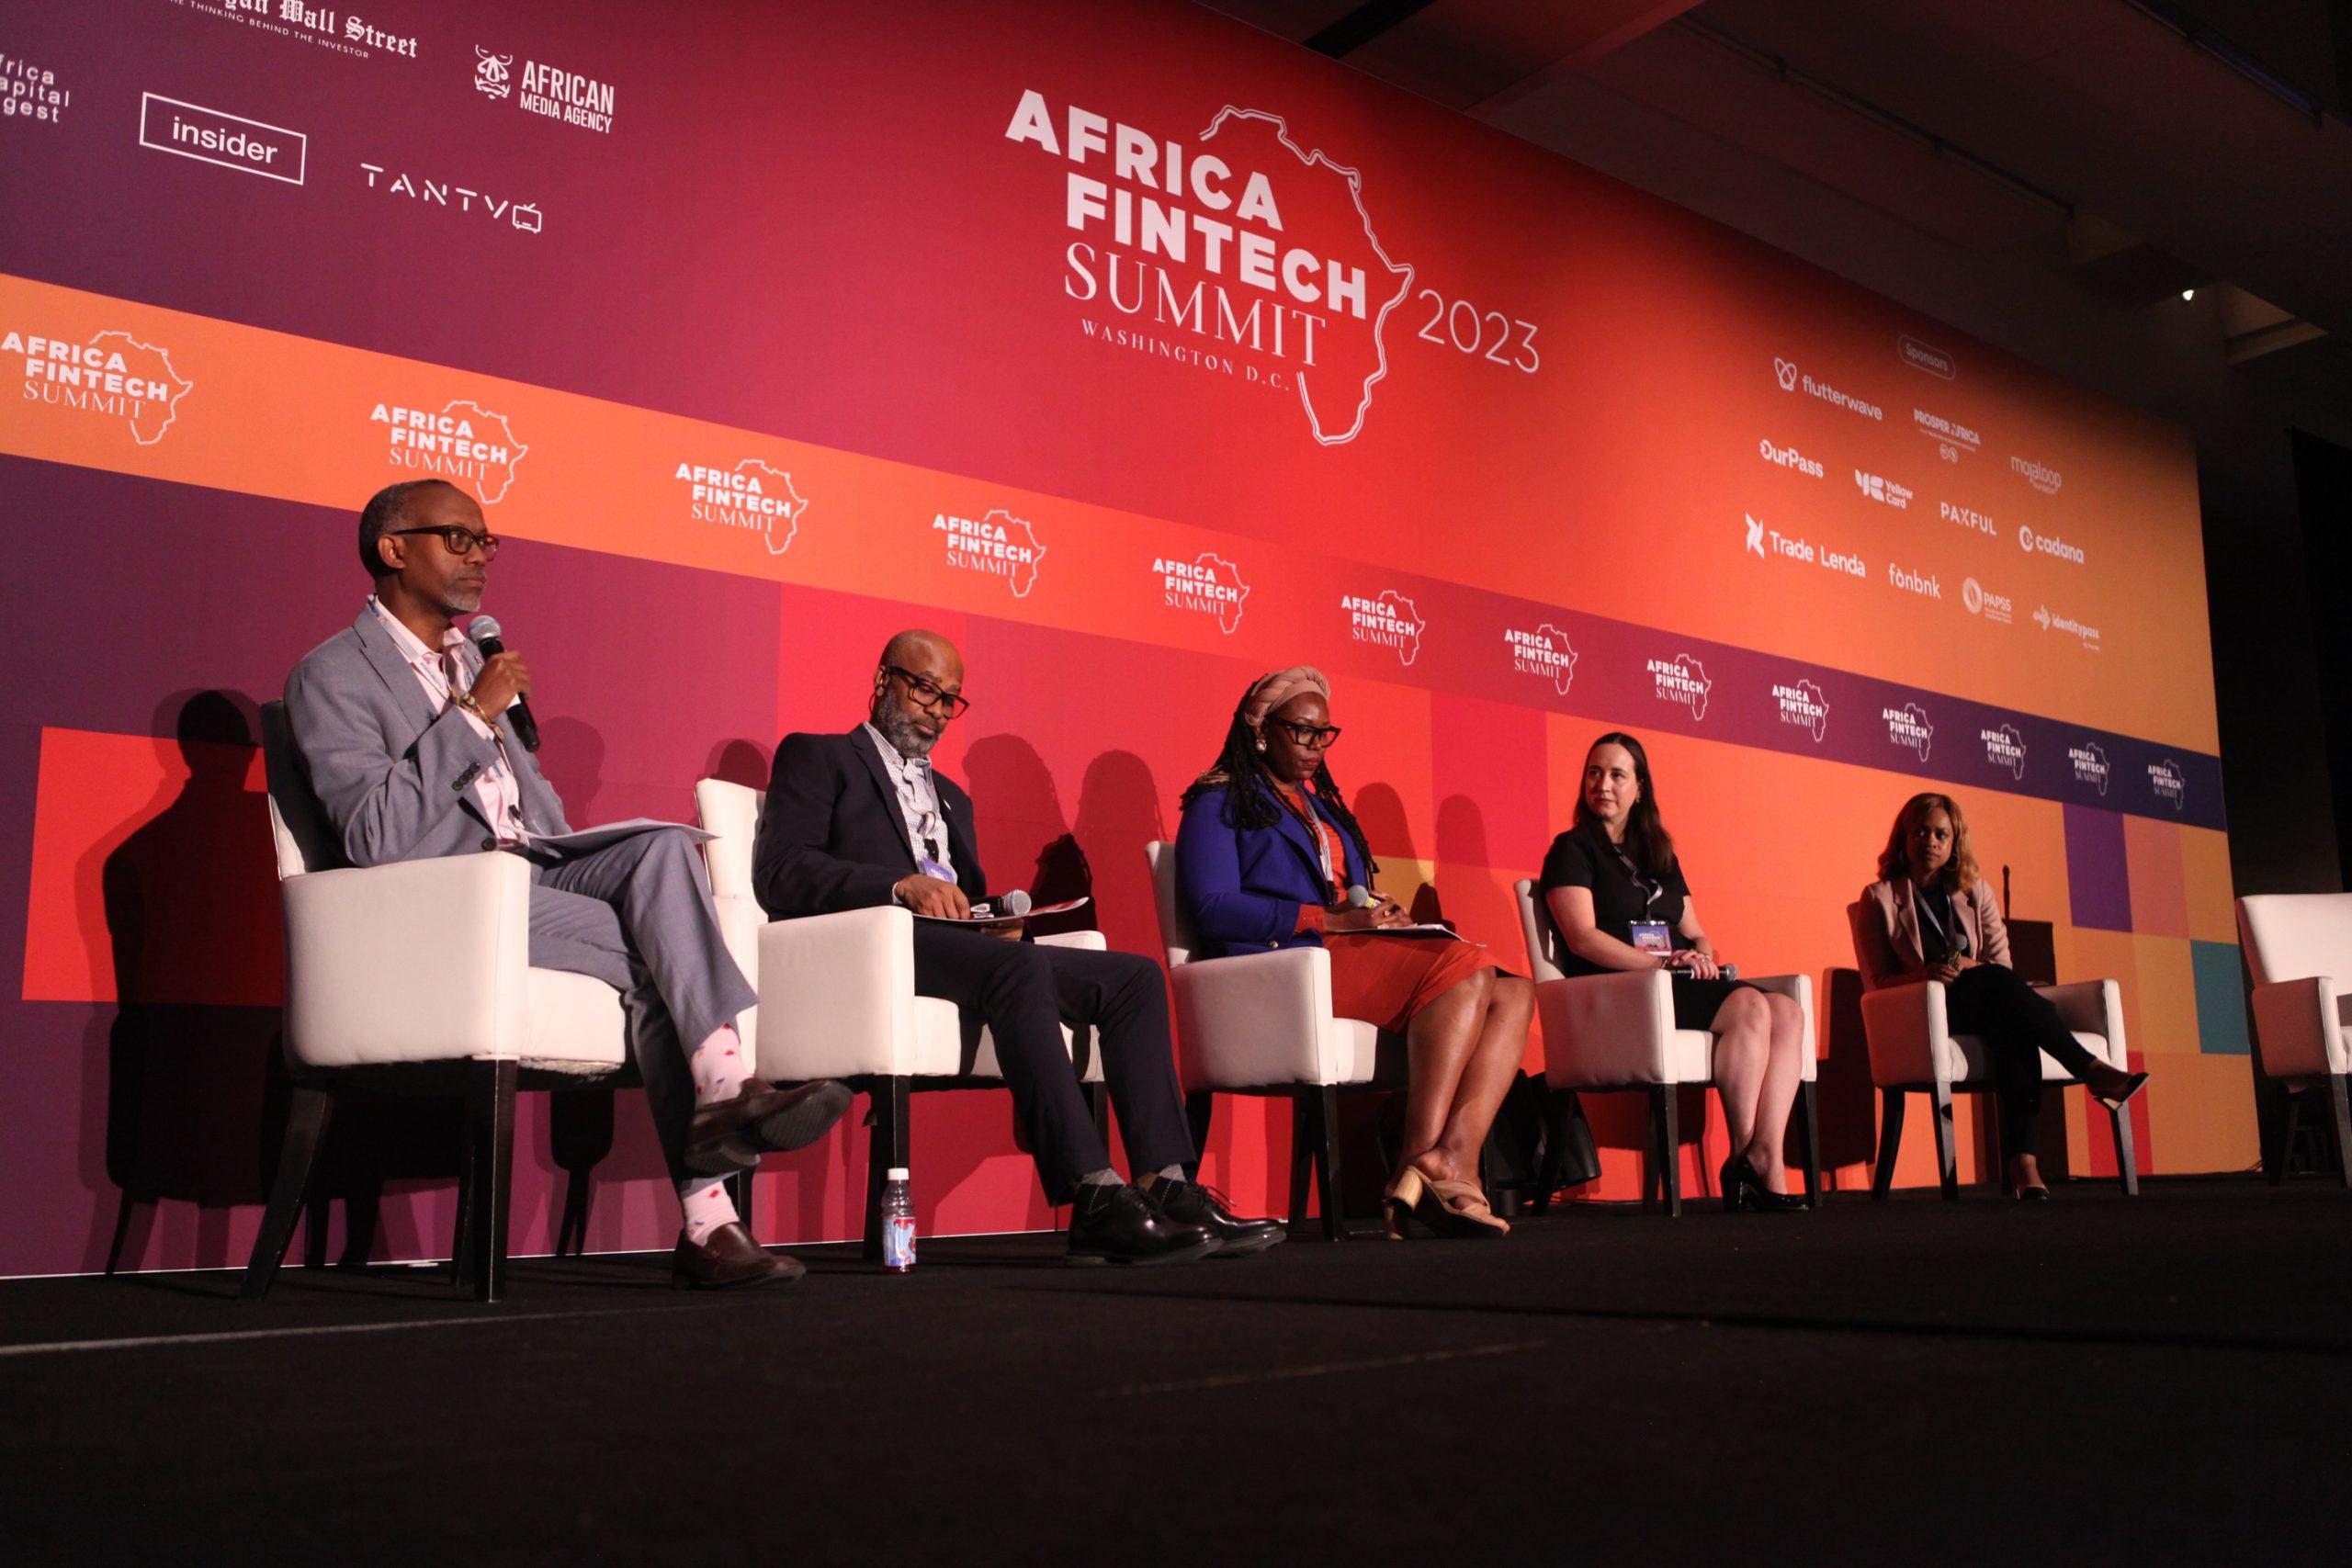 Andrew Barden and Zekarias Amsalu: A conversation with the minds behind the Africa Fintech Summit